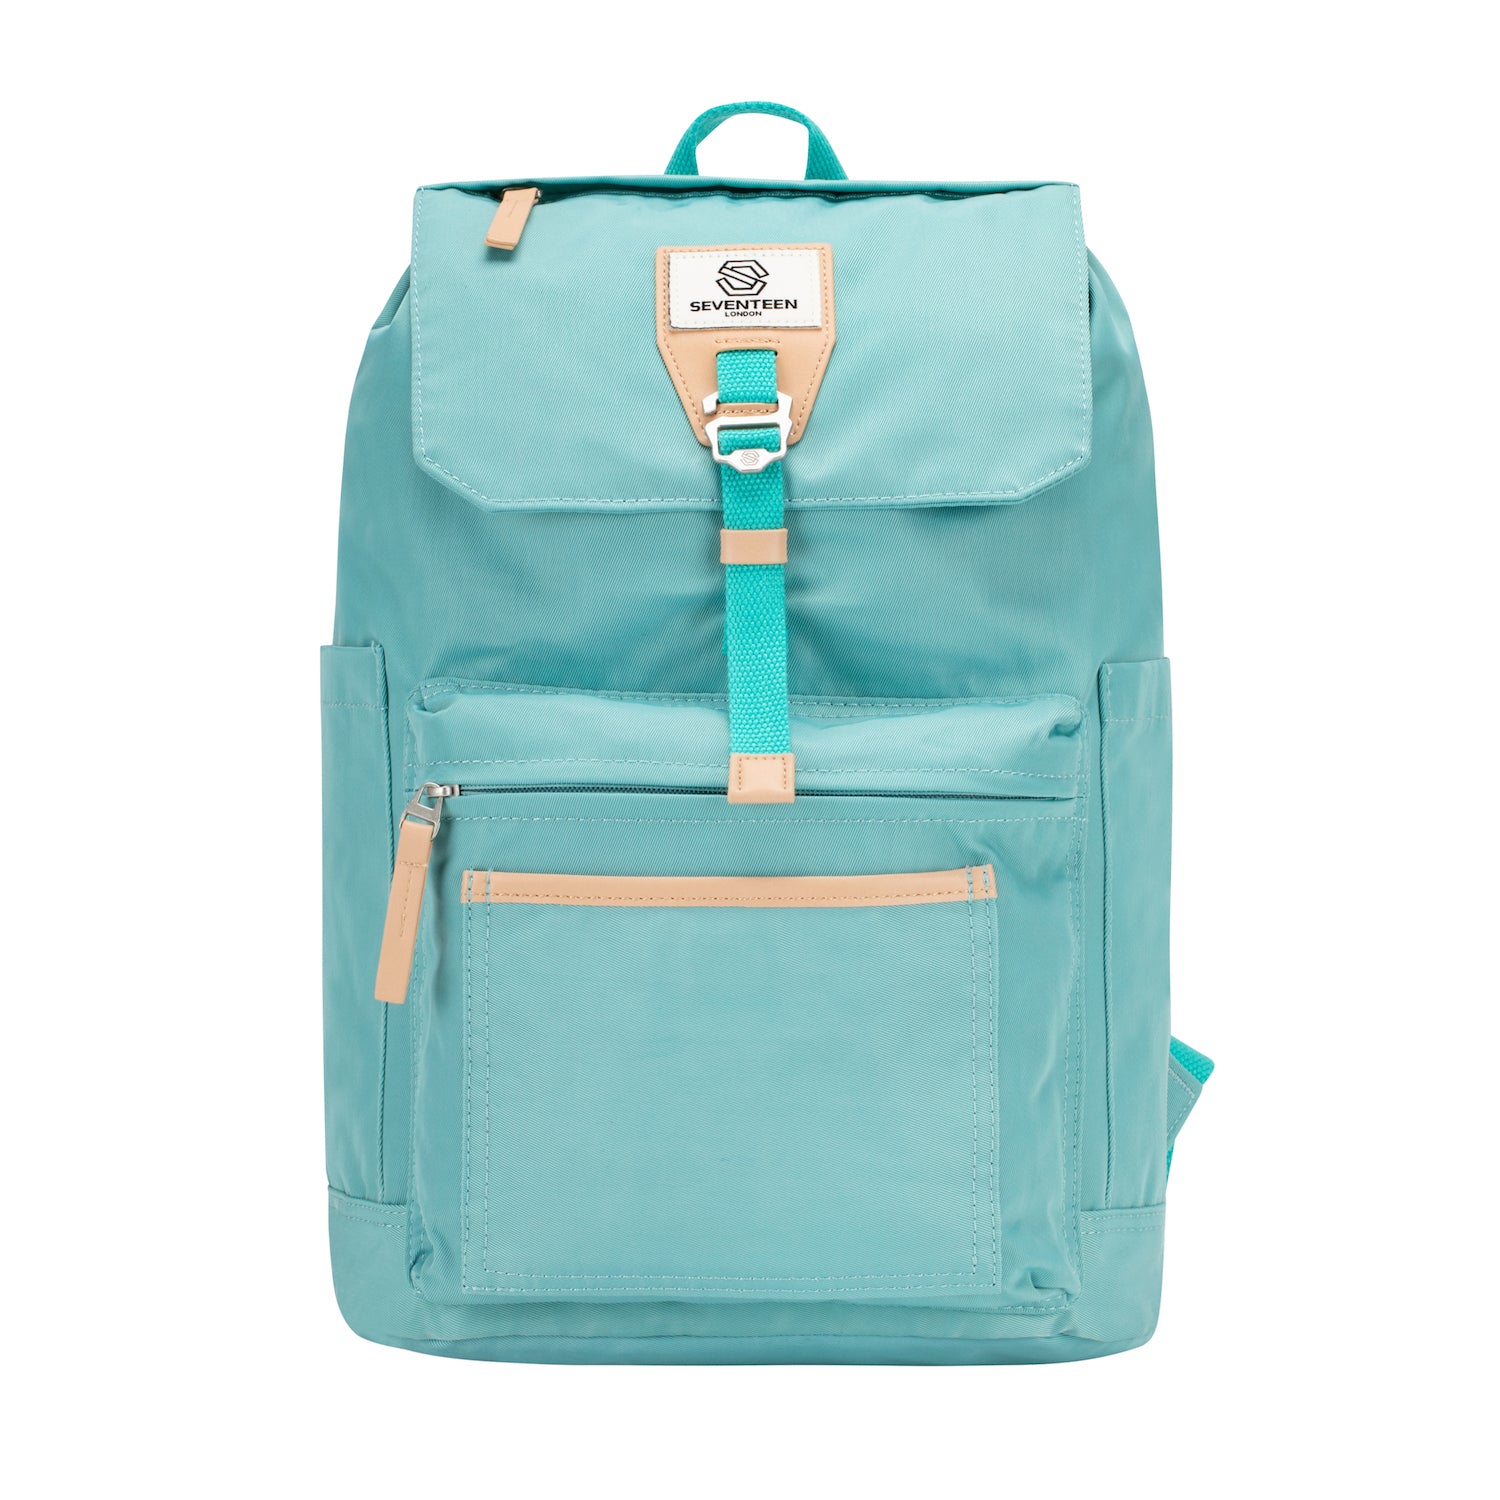 Fulham Backpack - Turquoise